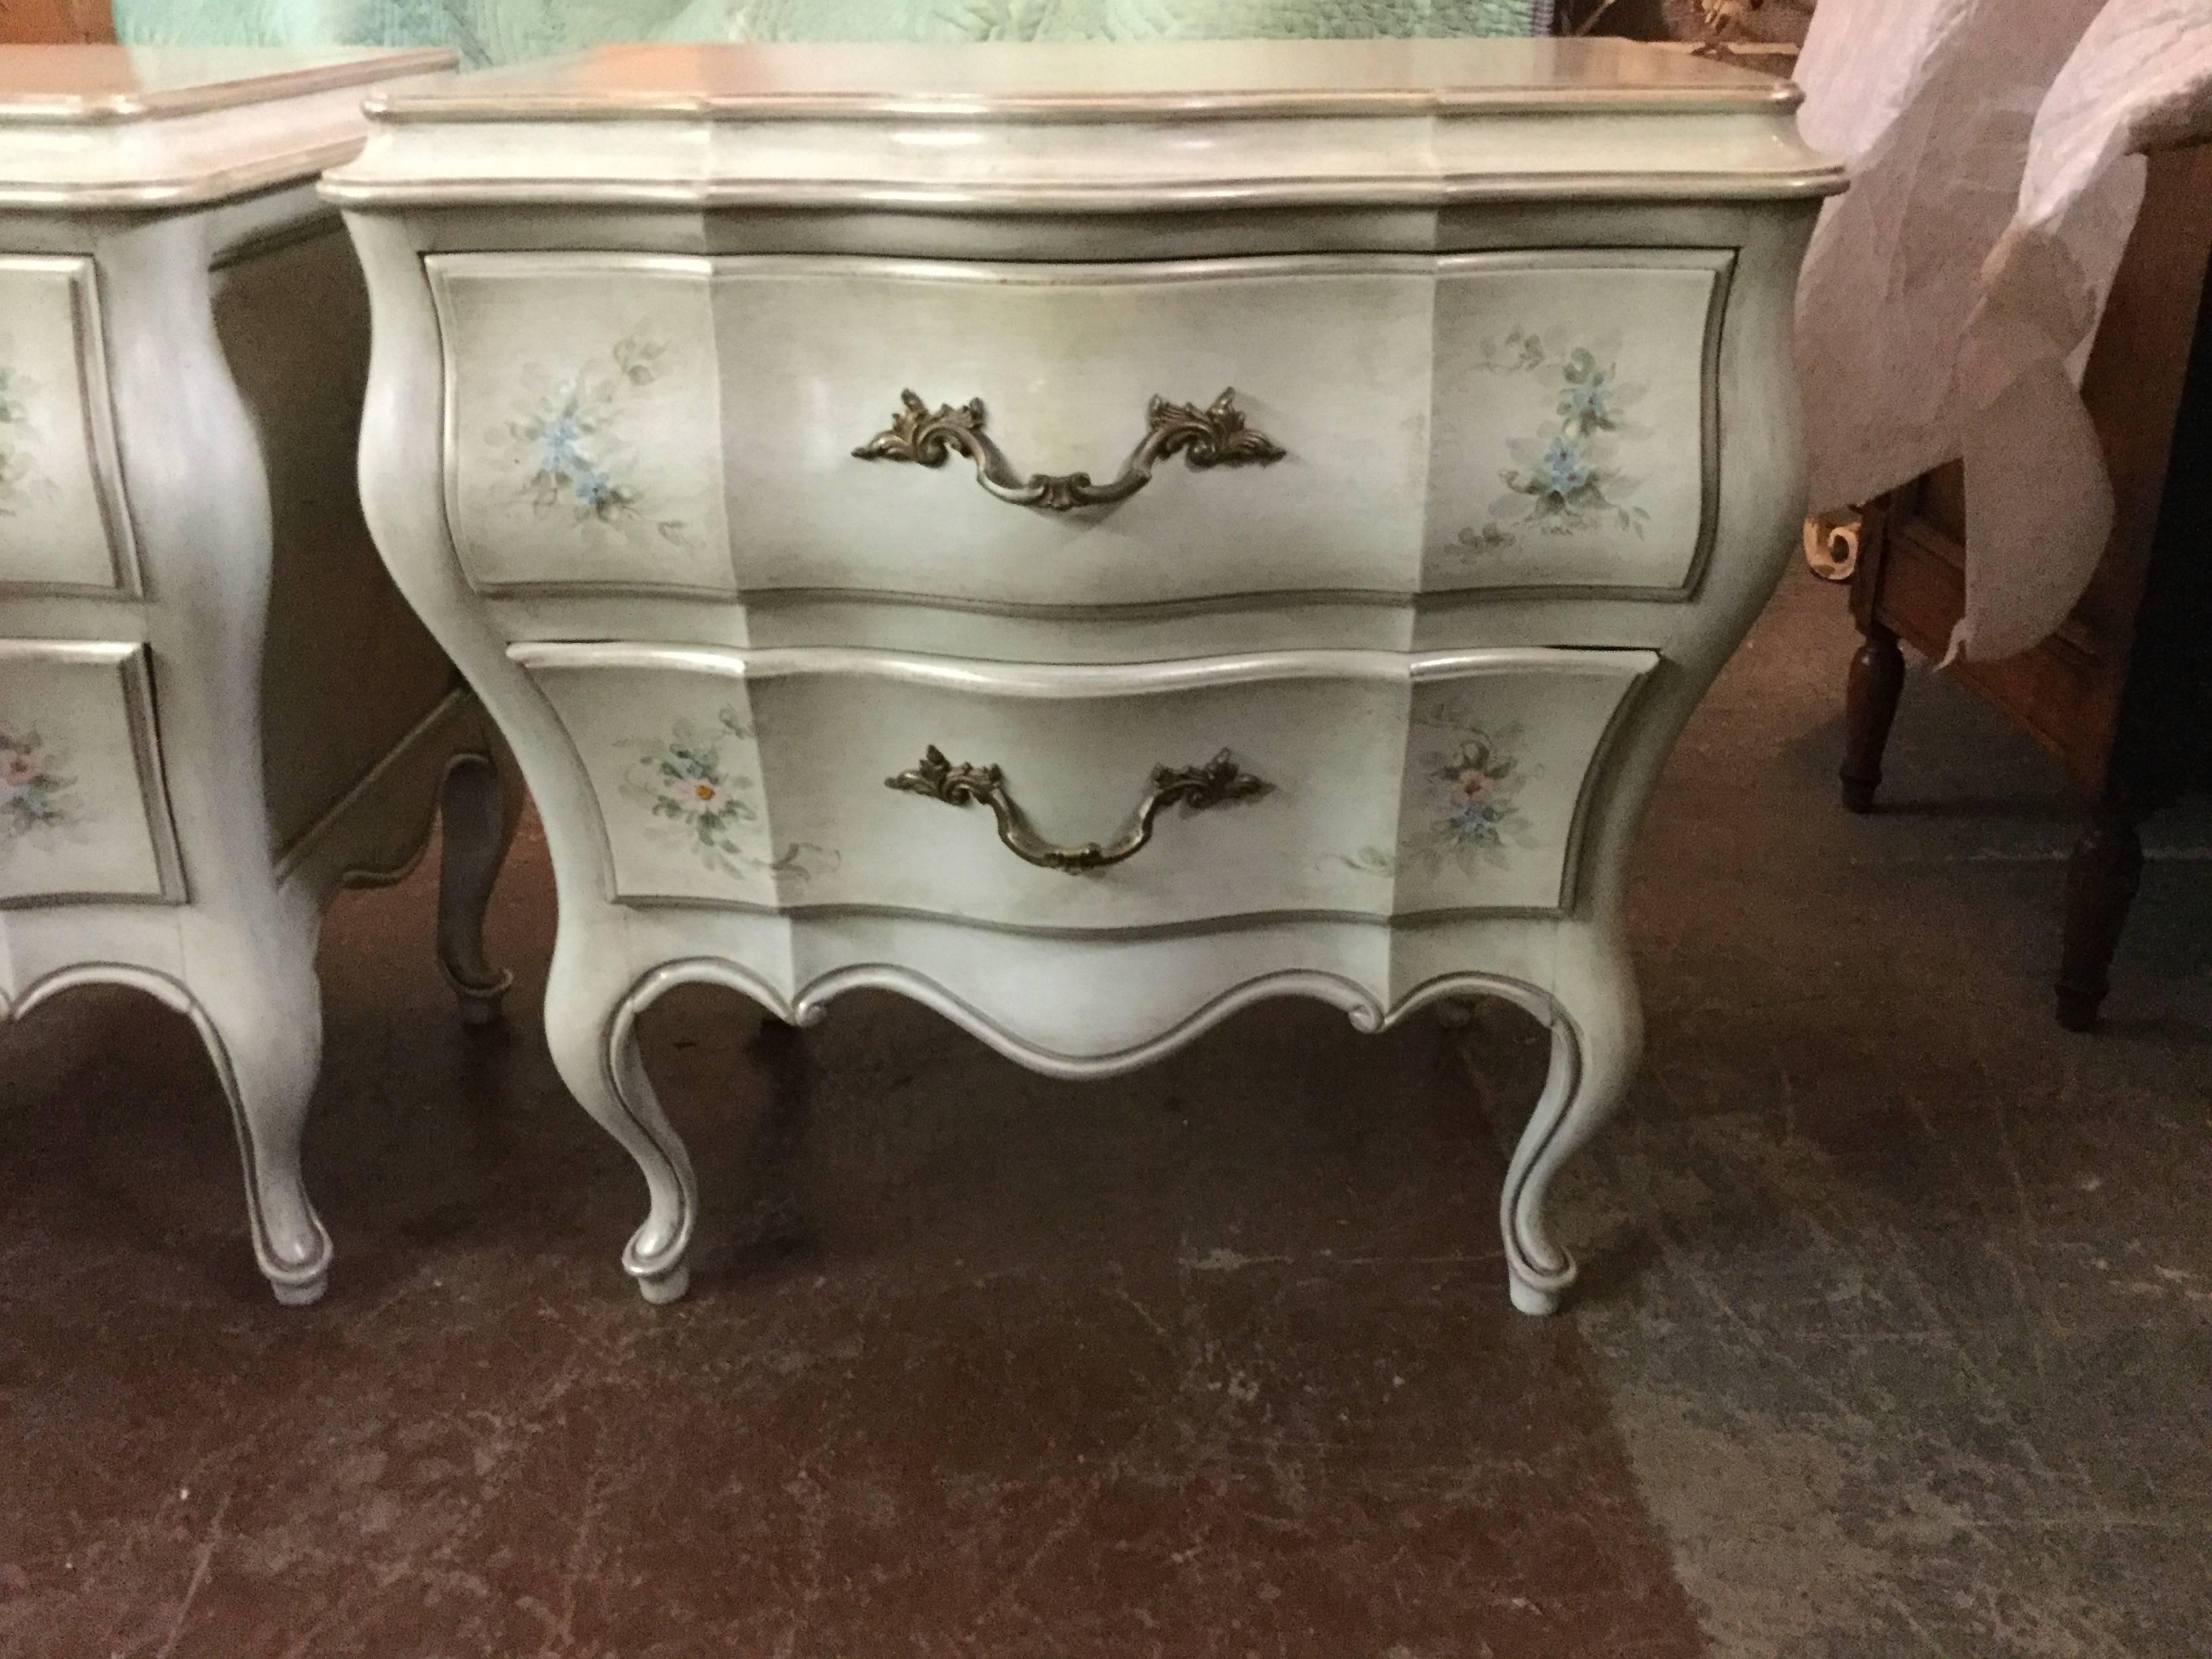 Hand-painted matching bombé chests. Custom painted in a neutral off-white with delicate floral motifs with silver-leaf accents throughout, including front of drawers and all edges.

Pair of chests: 25 wide x 18 deep x 26 tall.